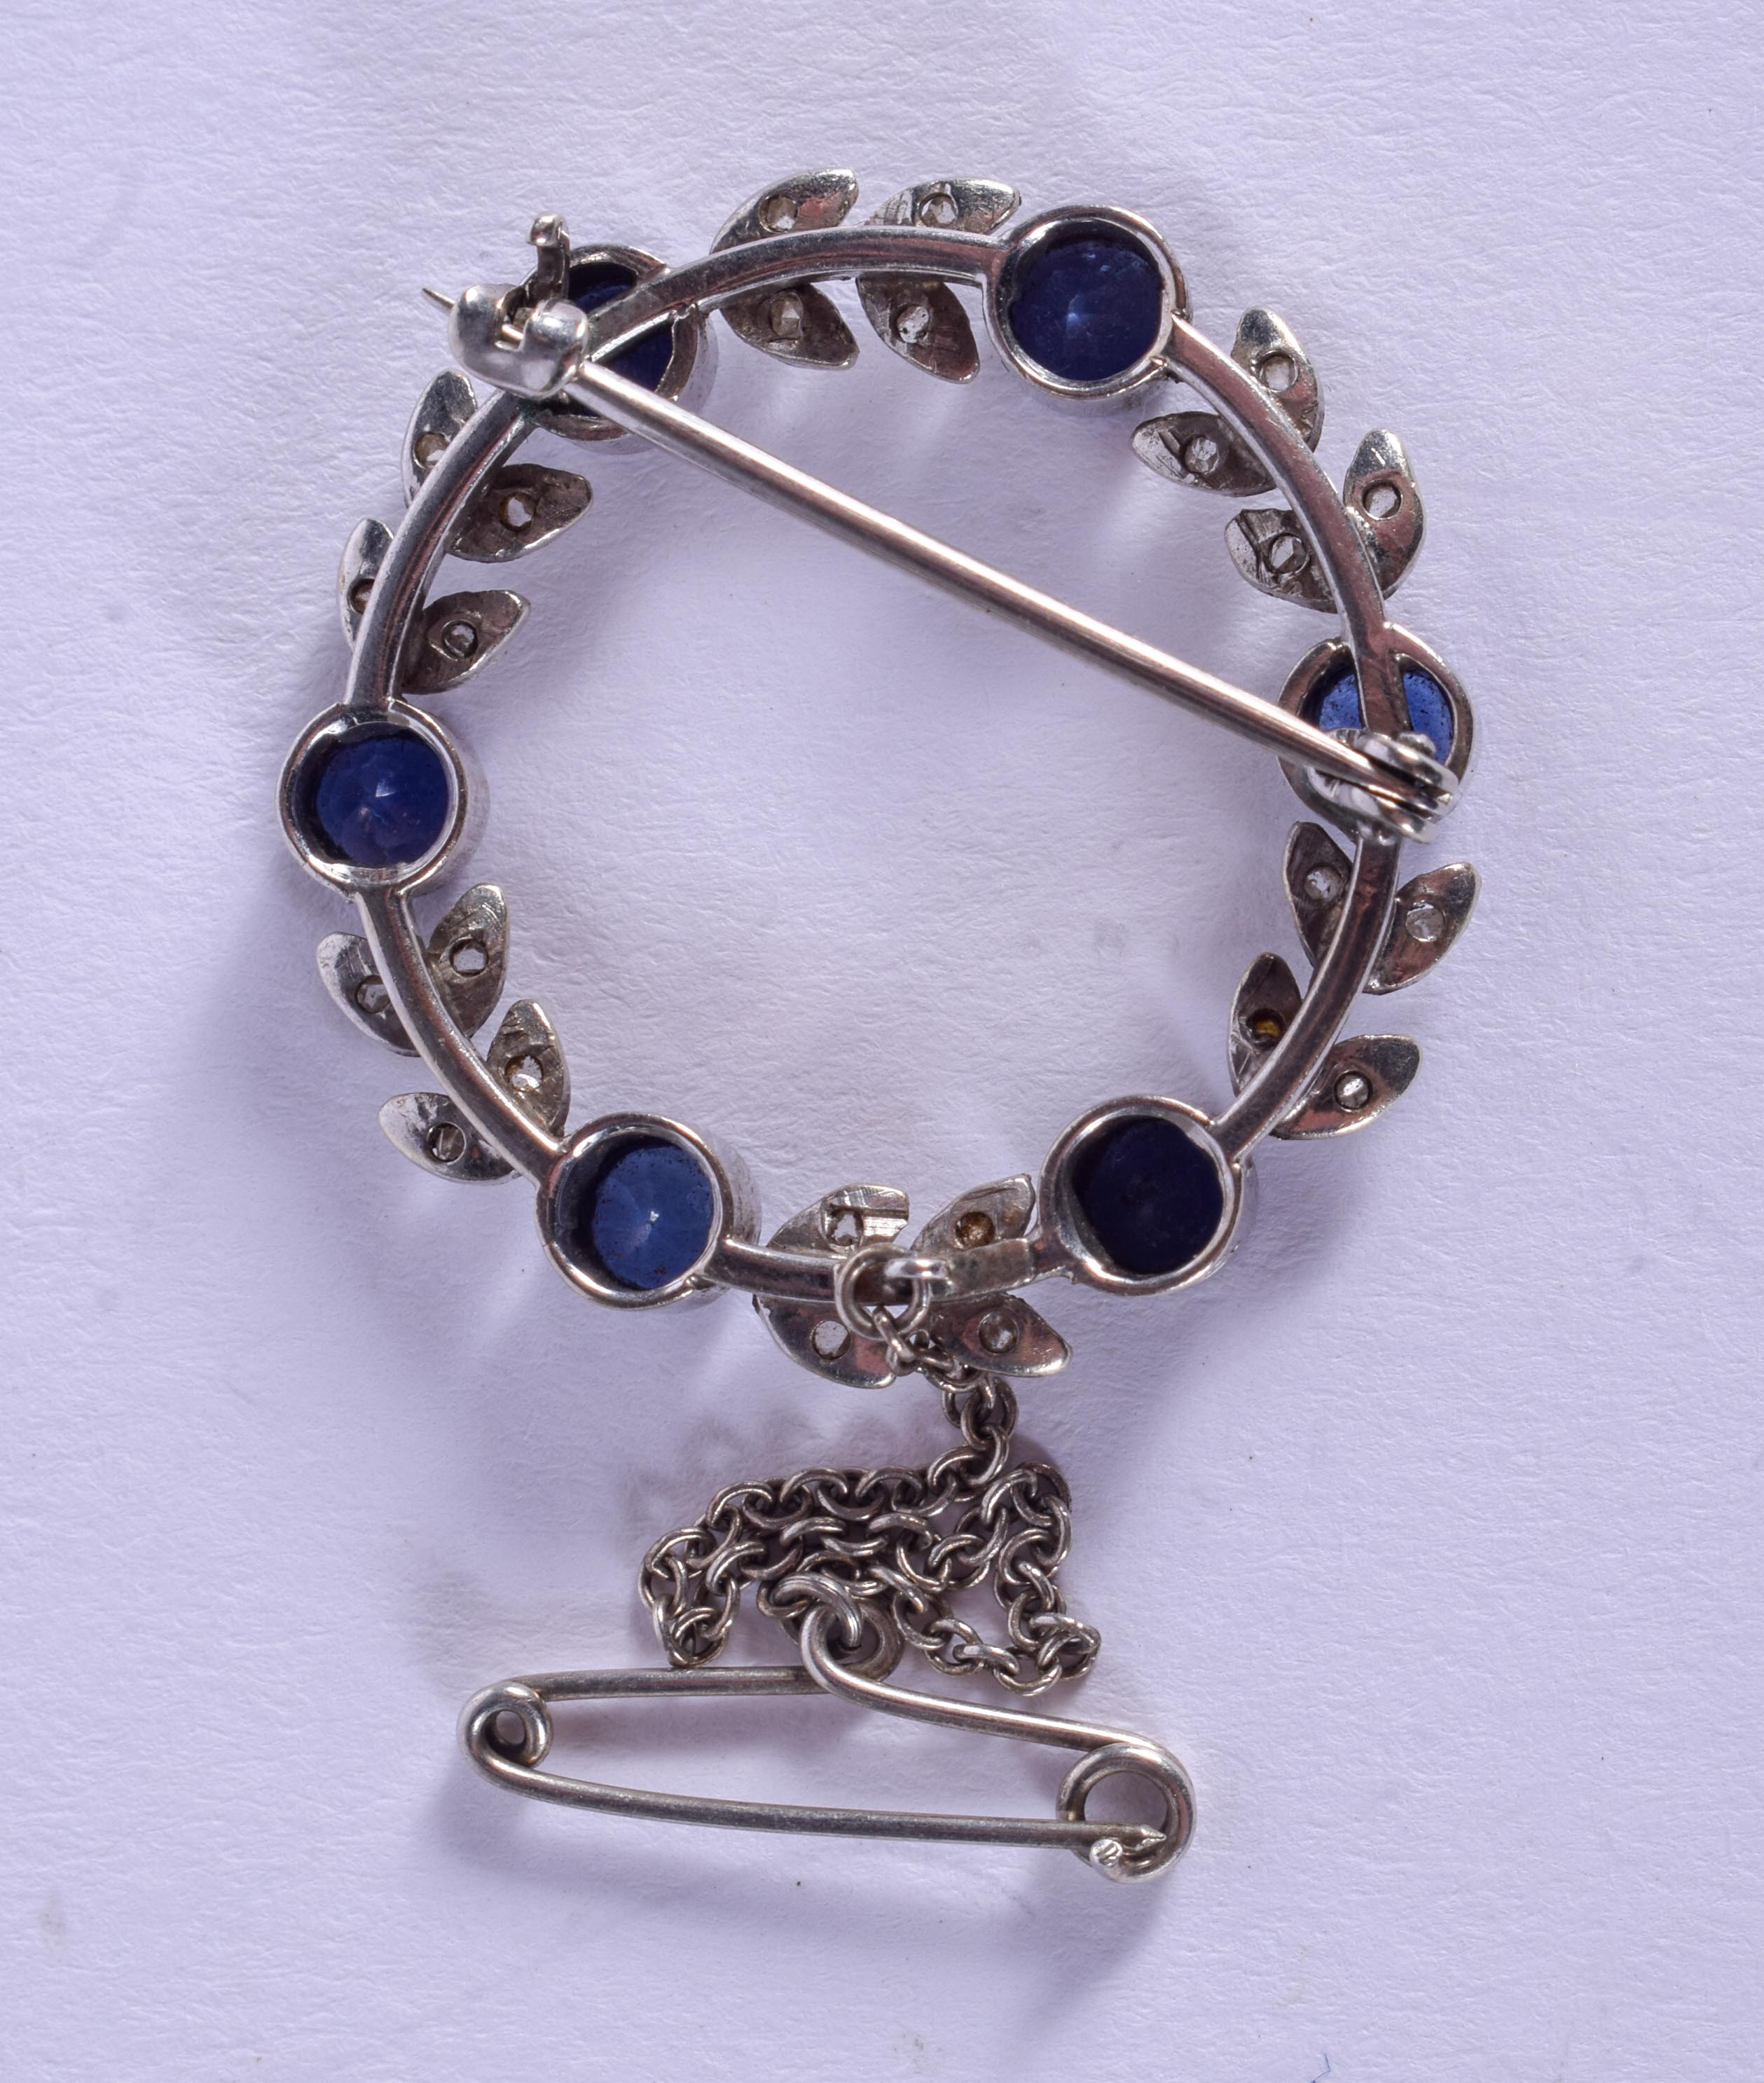 A LOVELY EDWARDIAN WHITE GOLD AND SAPPHIRE BROOCH. 4.5 grams. 2 cm wide. - Image 2 of 2